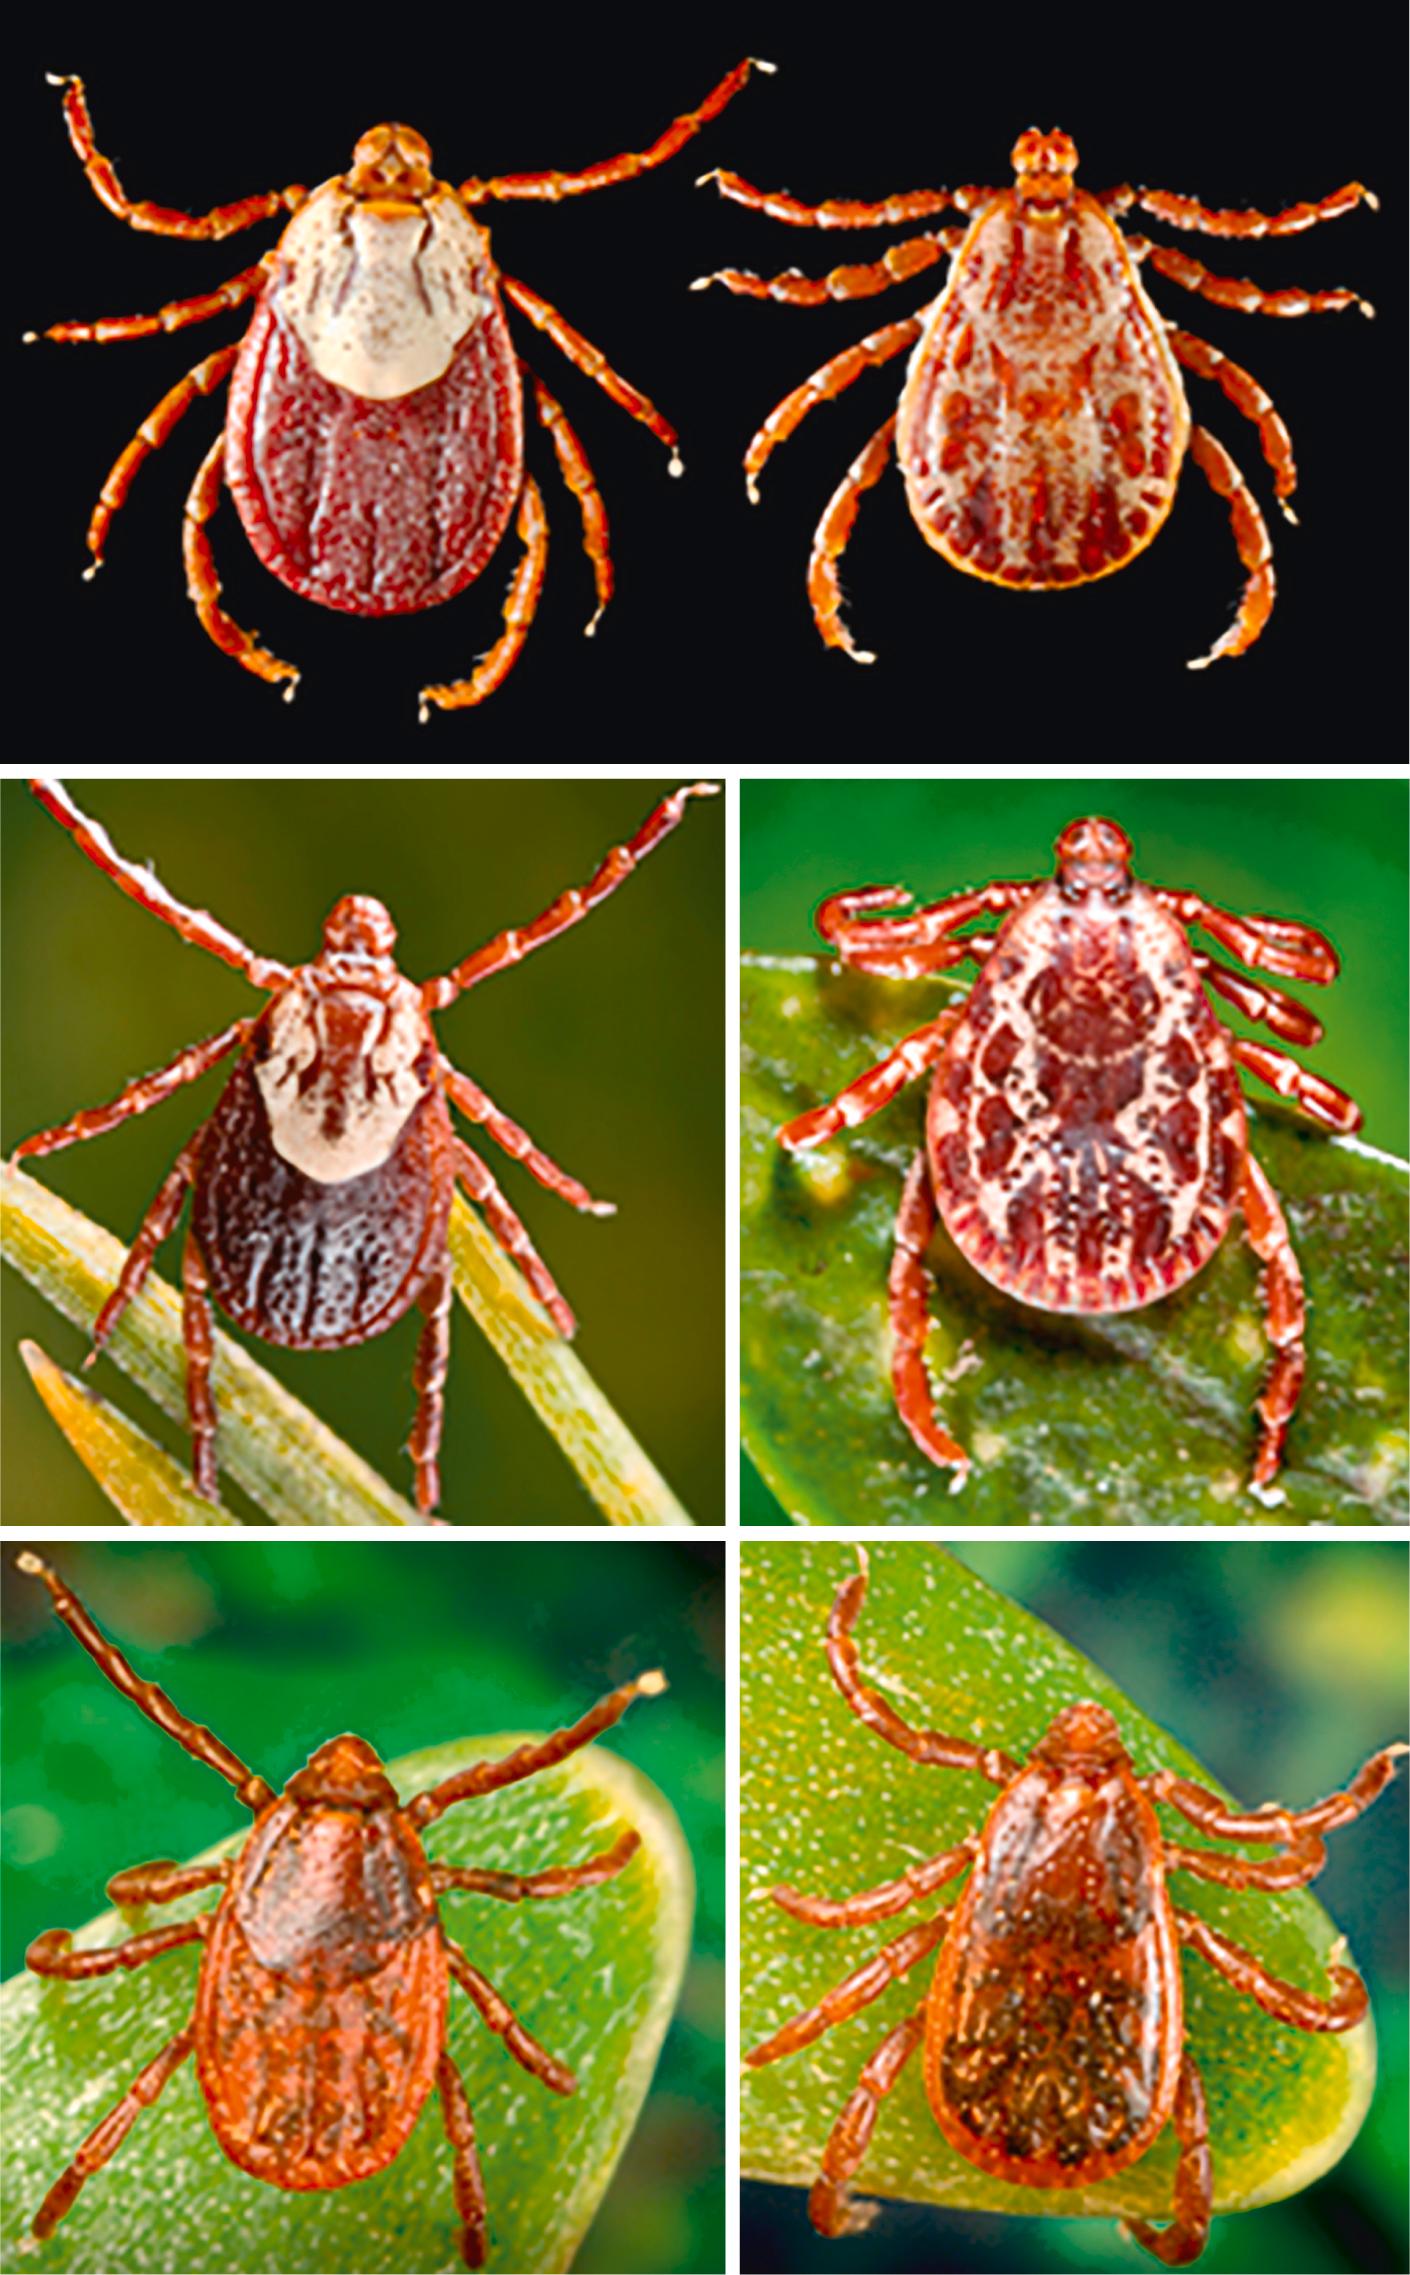 FIGURE 178.2, Female ( left ) and male ( right ) specimens of important tick vectors of Rickettsia rickettsii in North America, including Dermacentor andersoni ( top ), Dermacentor variabilis ( middle ), and Rhipicephalus sanguineus sensu lato ( bottom ).